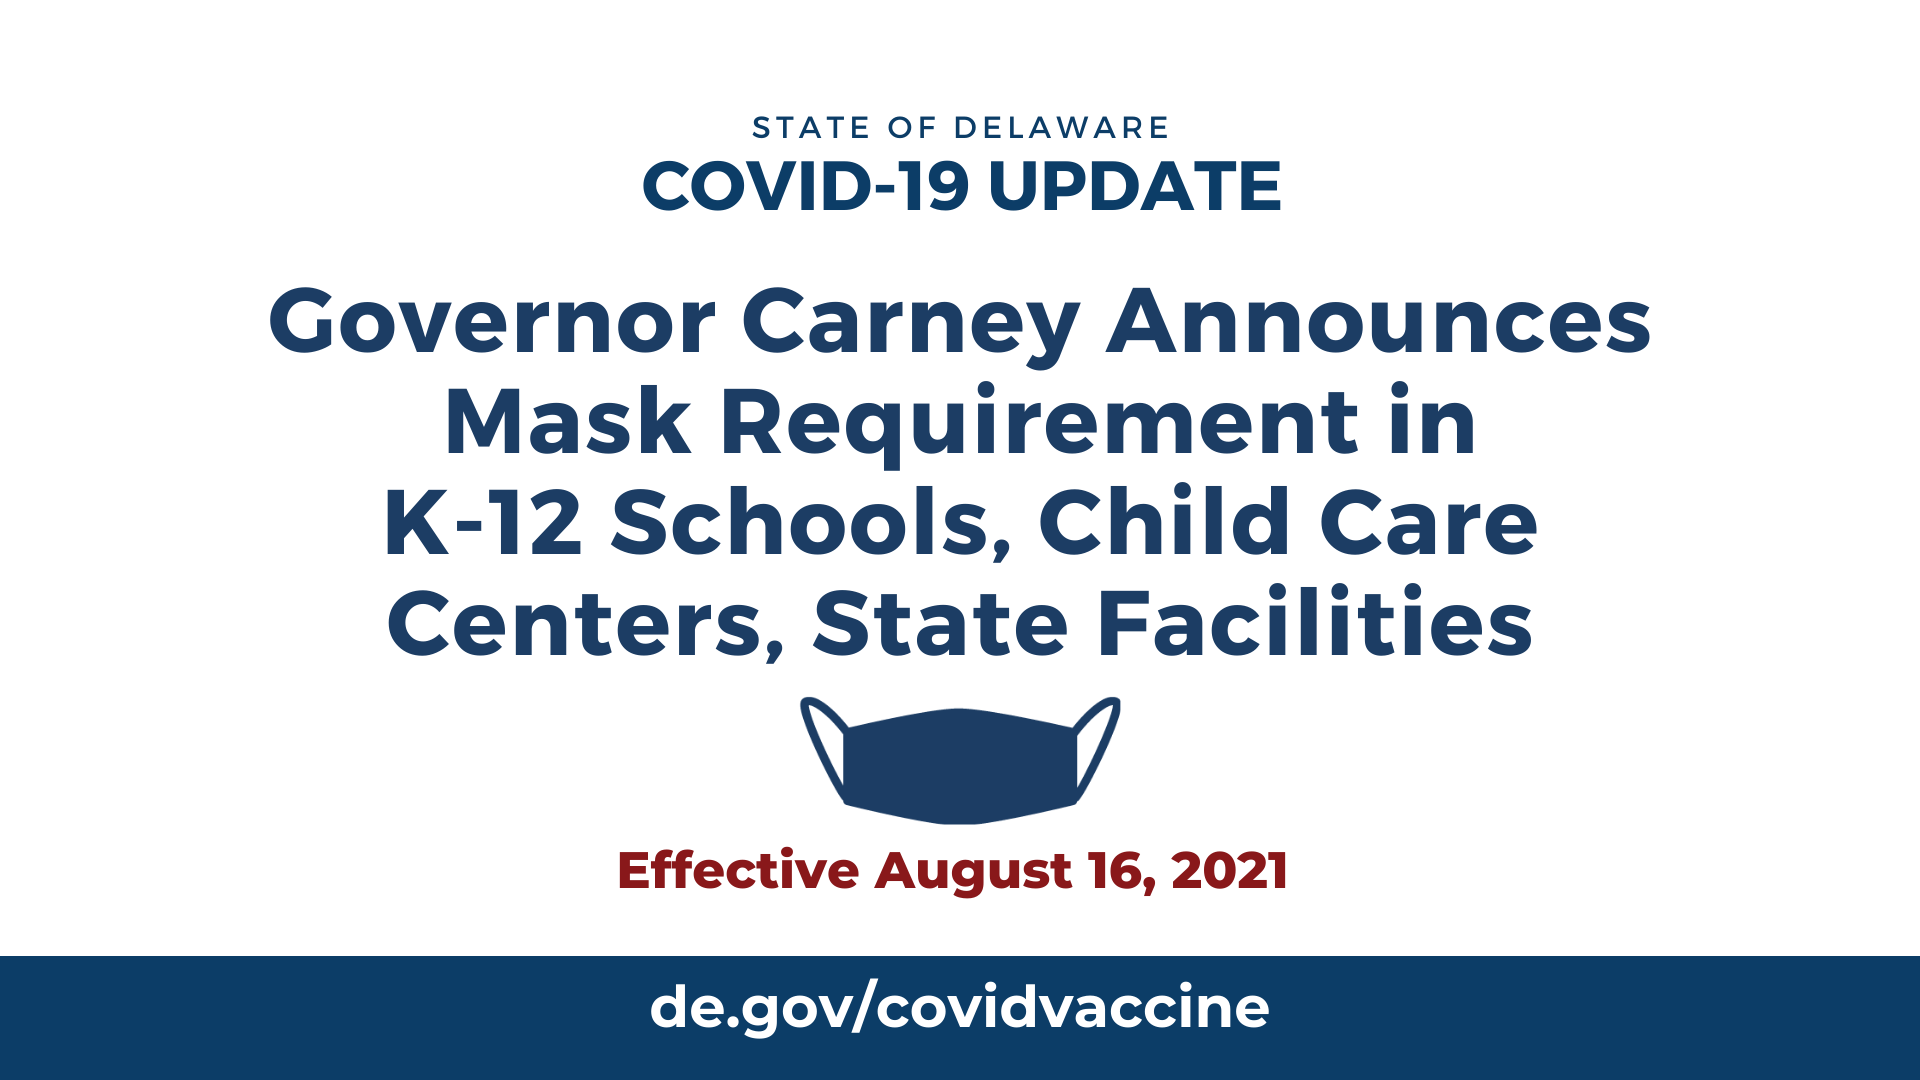 Governor Carney Announces Mask Requirement in K-12 Schools, Child Care Centers, State Facilities